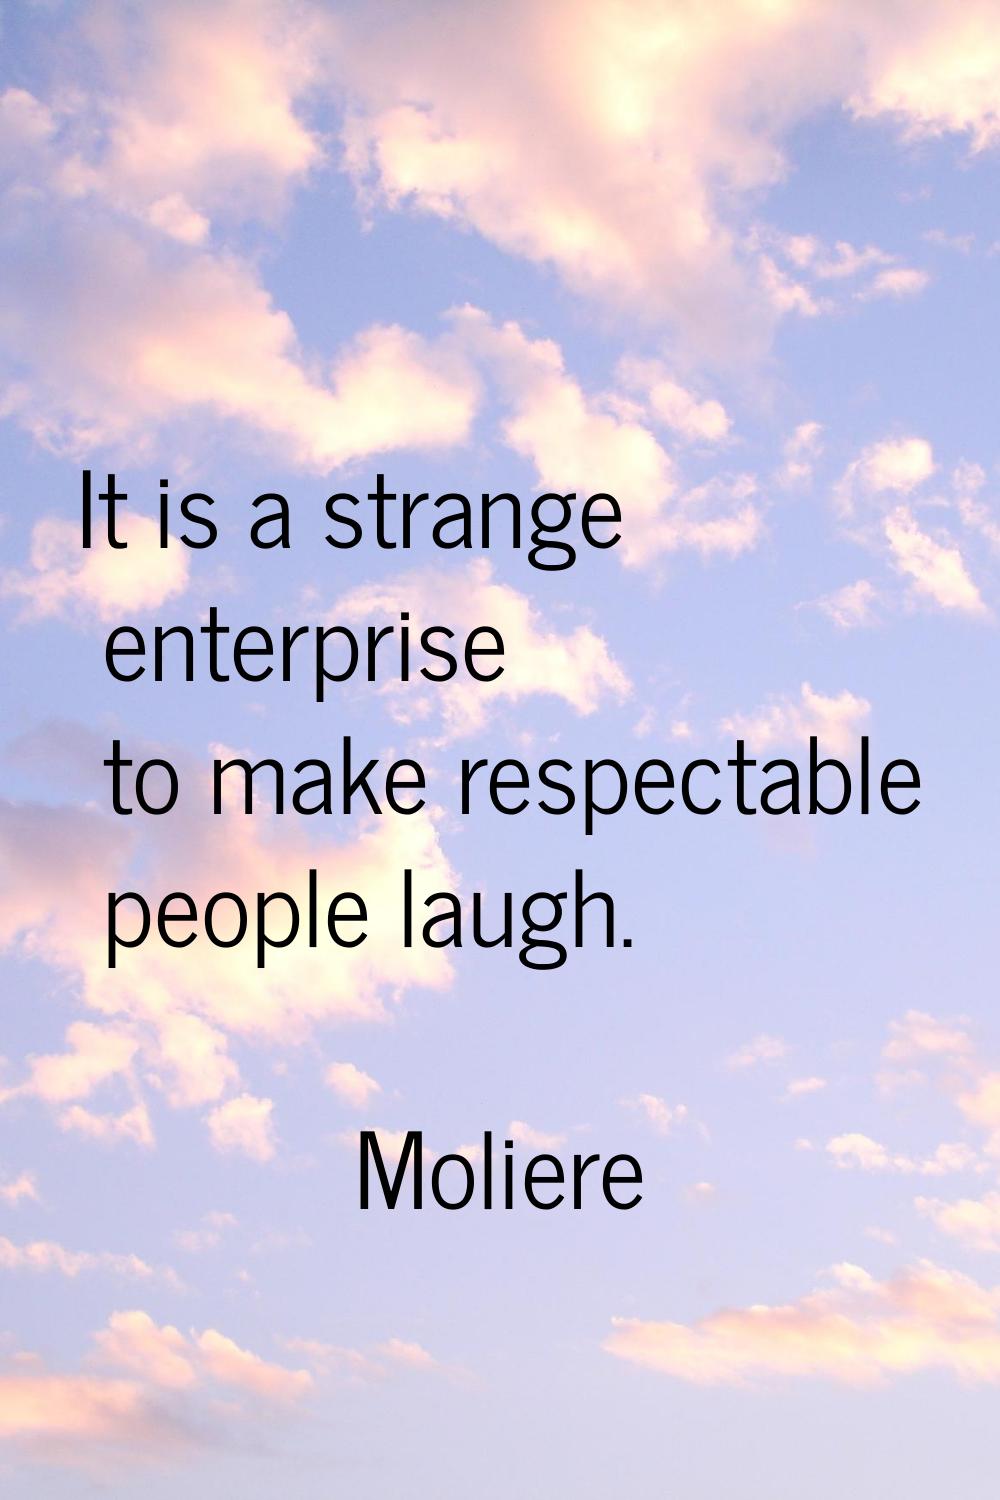 It is a strange enterprise to make respectable people laugh.